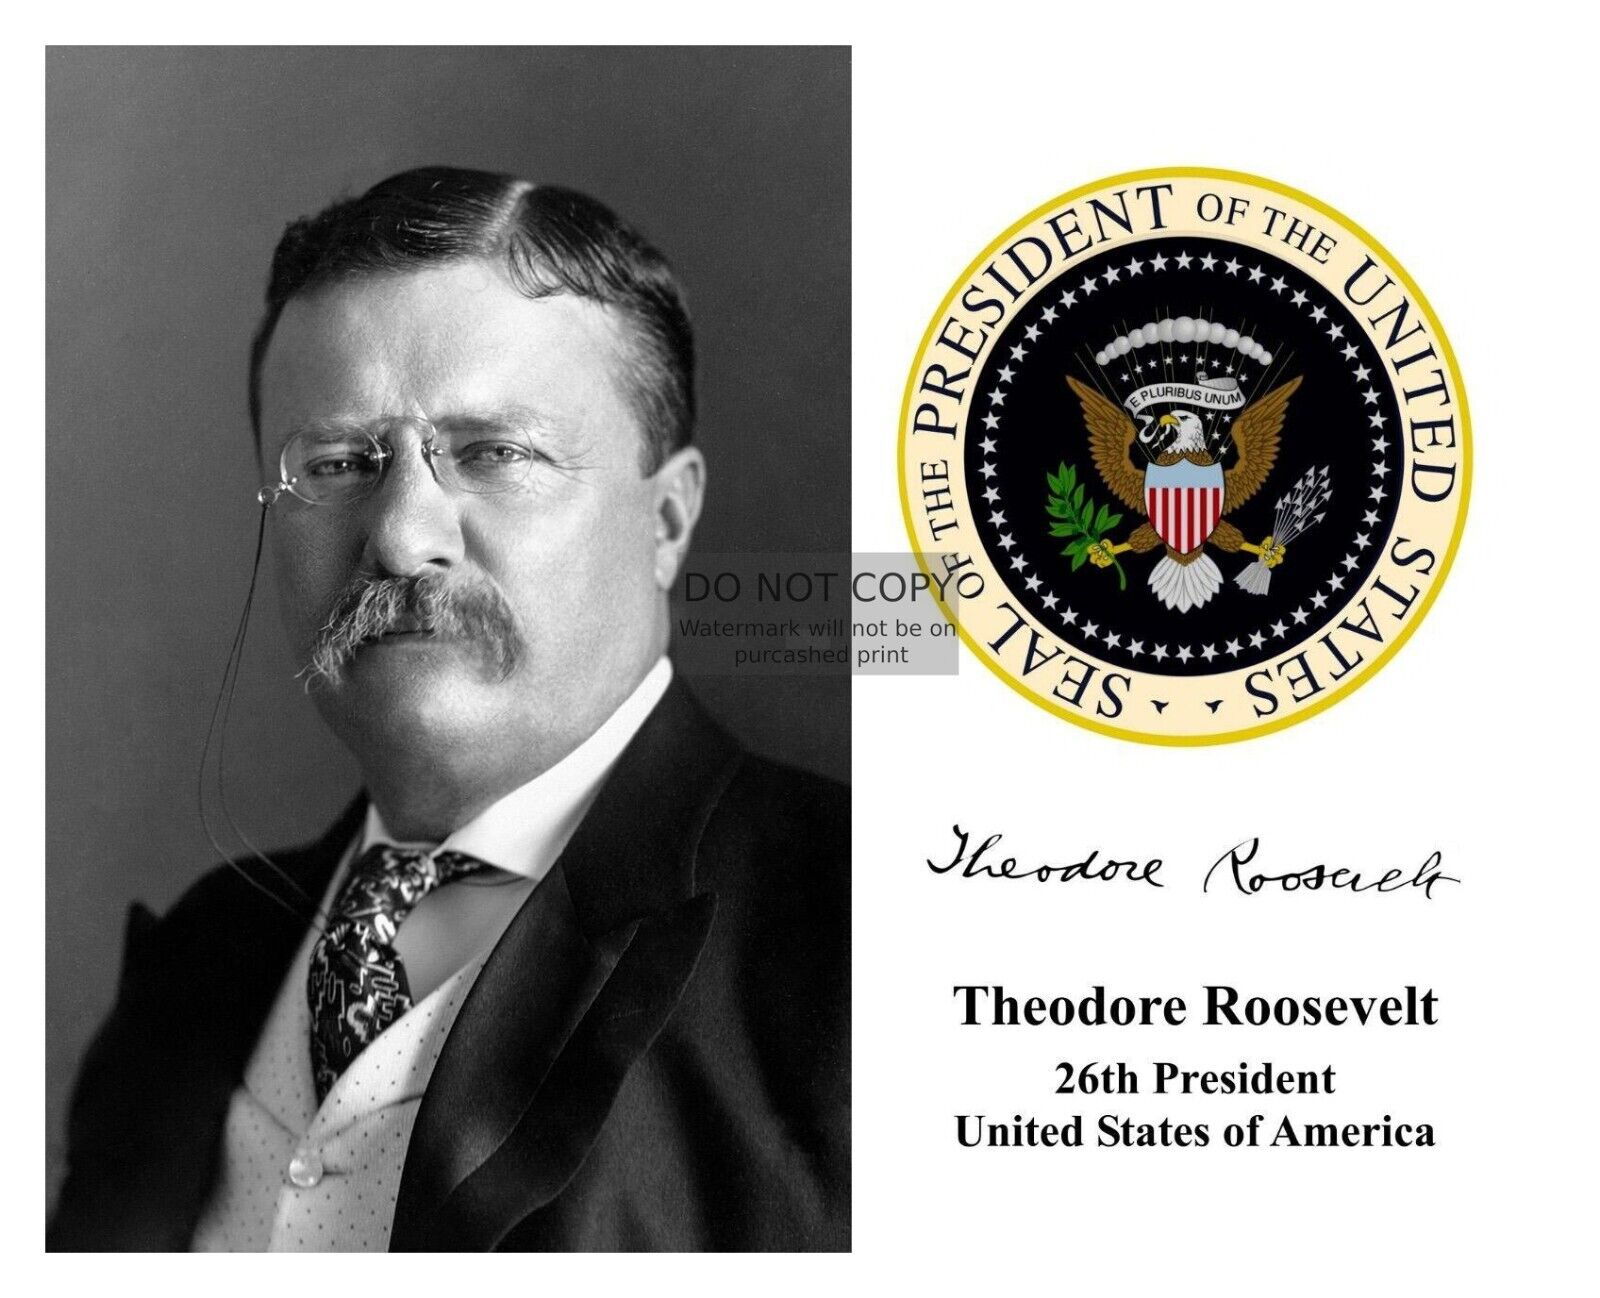 PRESIDENT THEODORE TEDDY ROOSEVELT PRESIDENTIAL SEAL AUTOGRAPHED 8X10 PHOTOGRAPH